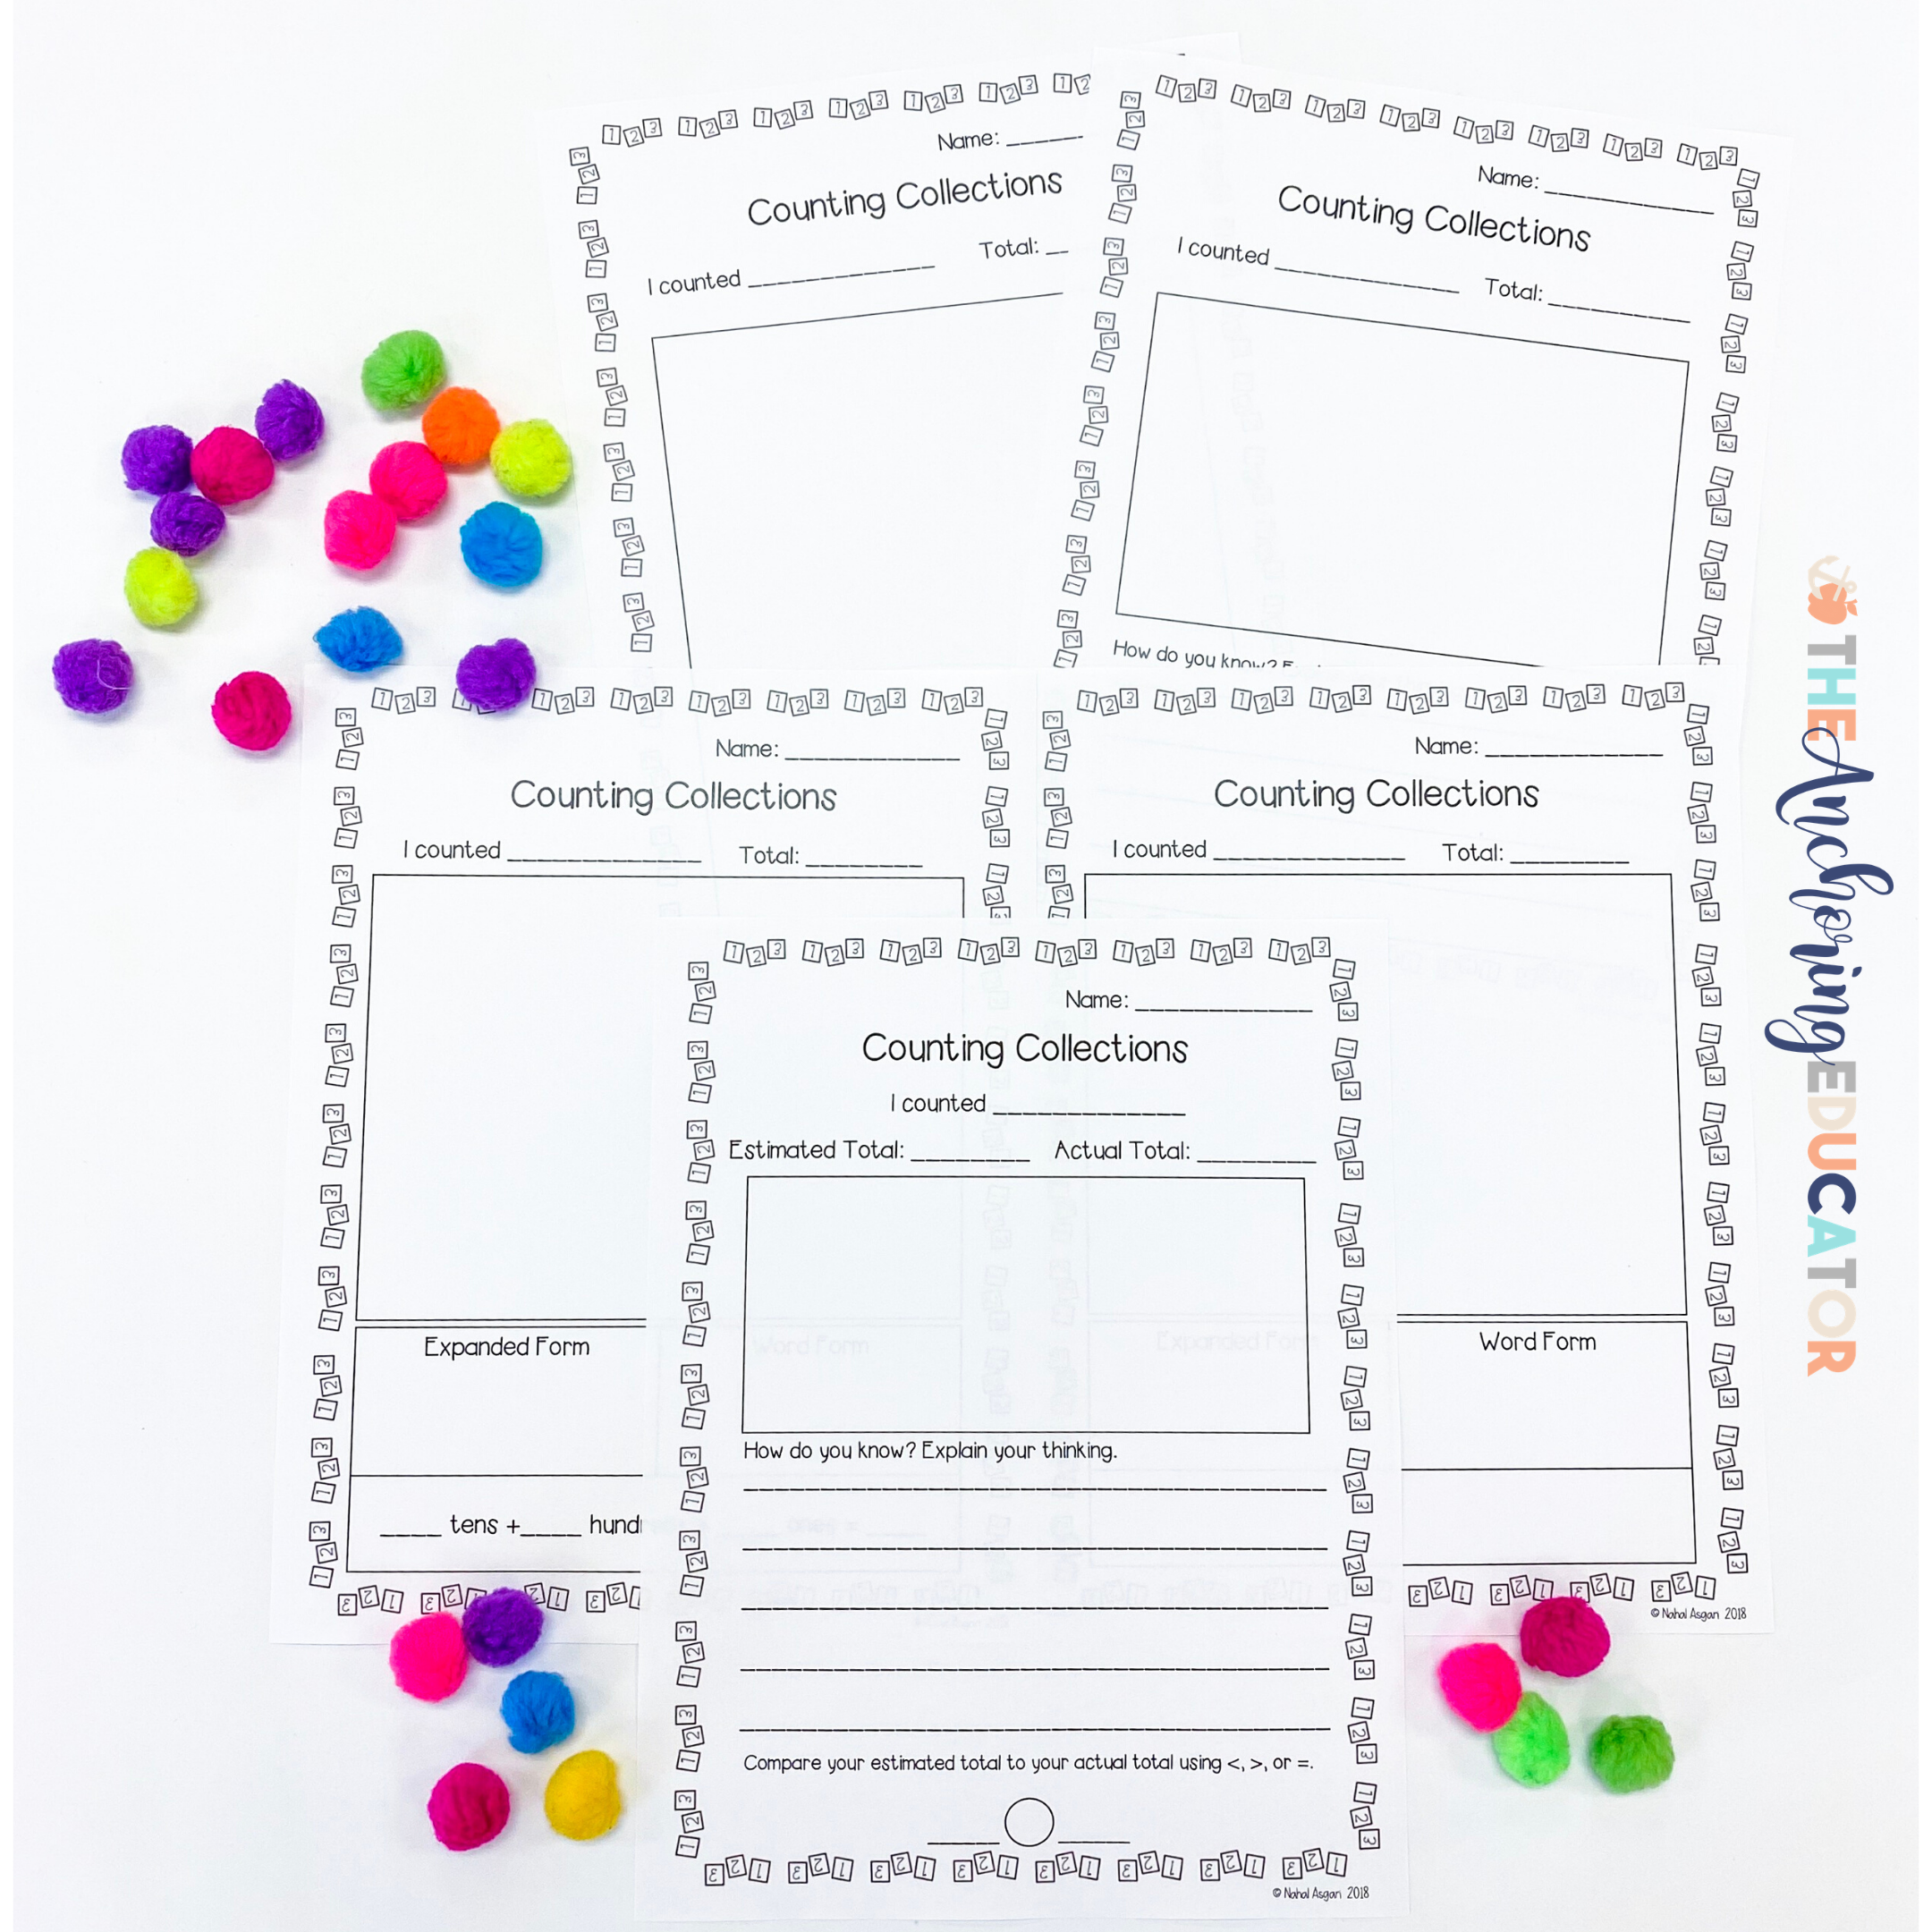 Counting Collections: The Best Way to Build Number Sense in the Primary Grades